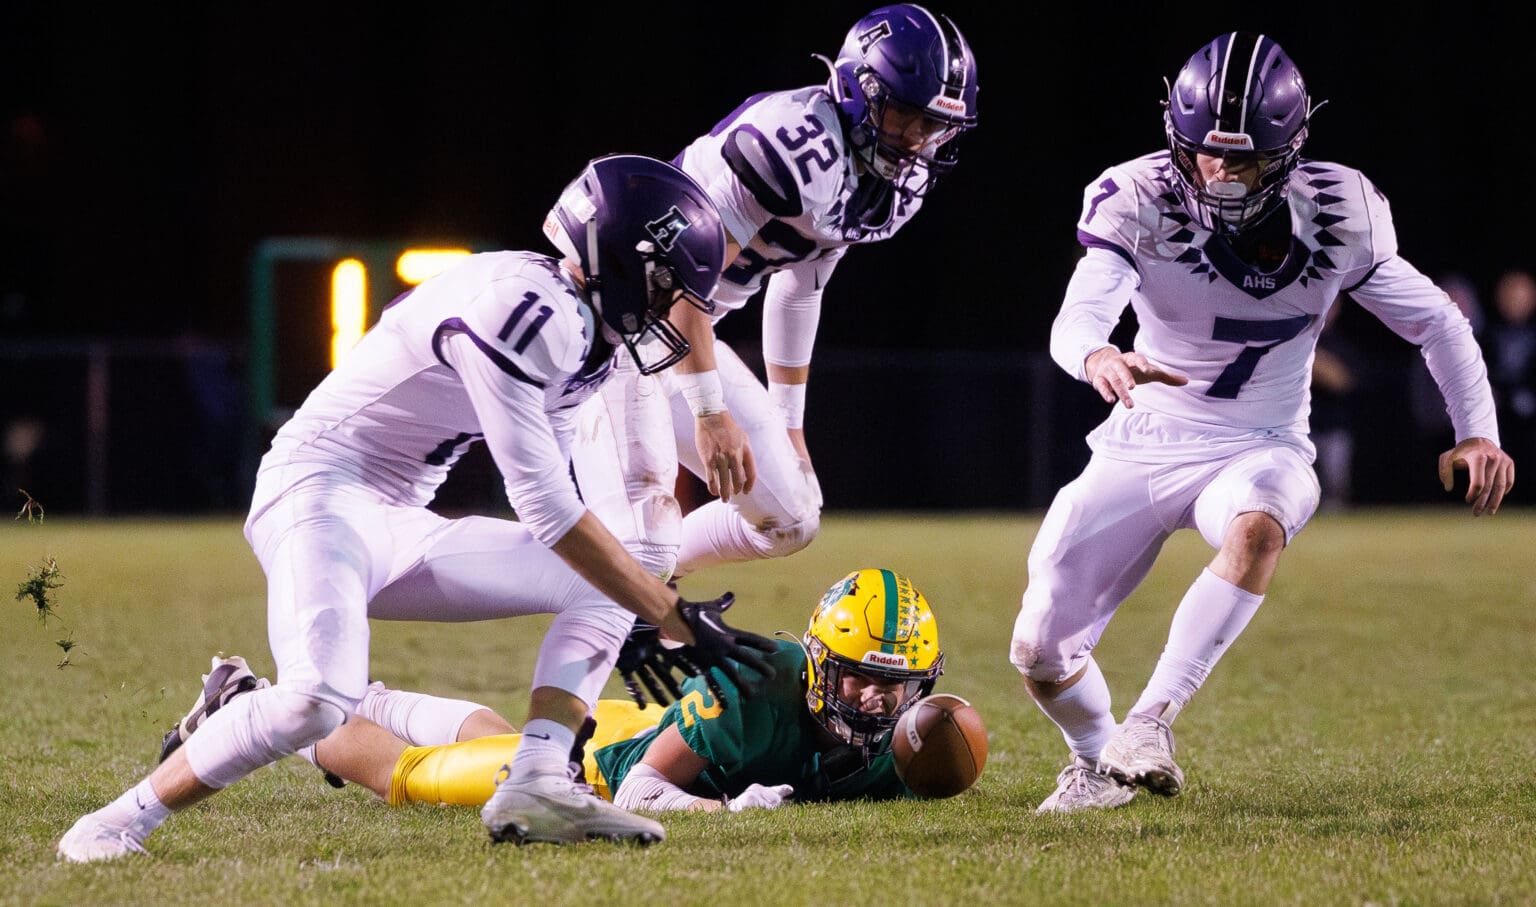 Anacortes players converge on the ball for a fumble recovery Oct. 27 as Lynden’s Bradey Elsner watches the play. Anacortes is on to the 2A state championship game after defeating Enumclaw in the state semifinals